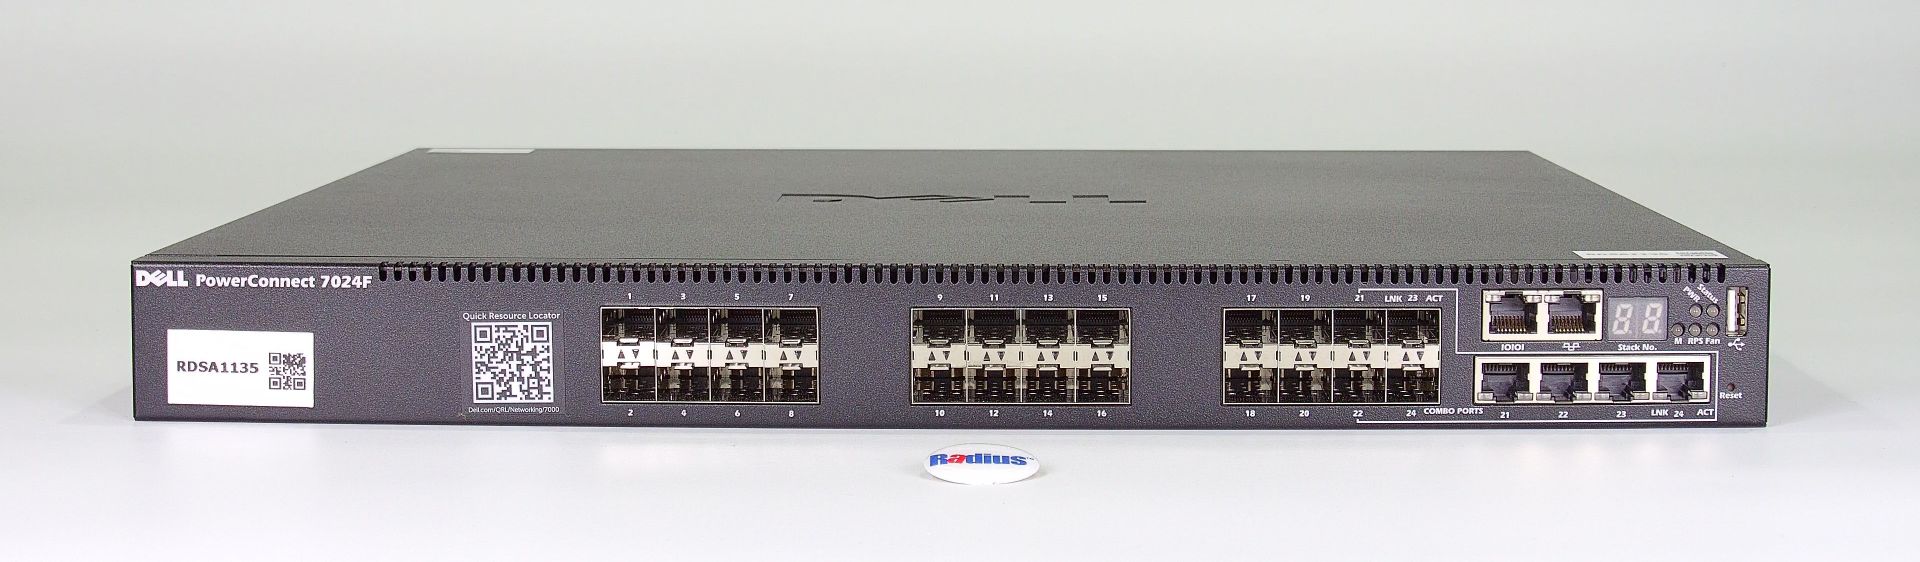 Dell PowerConnect 7024F Switch